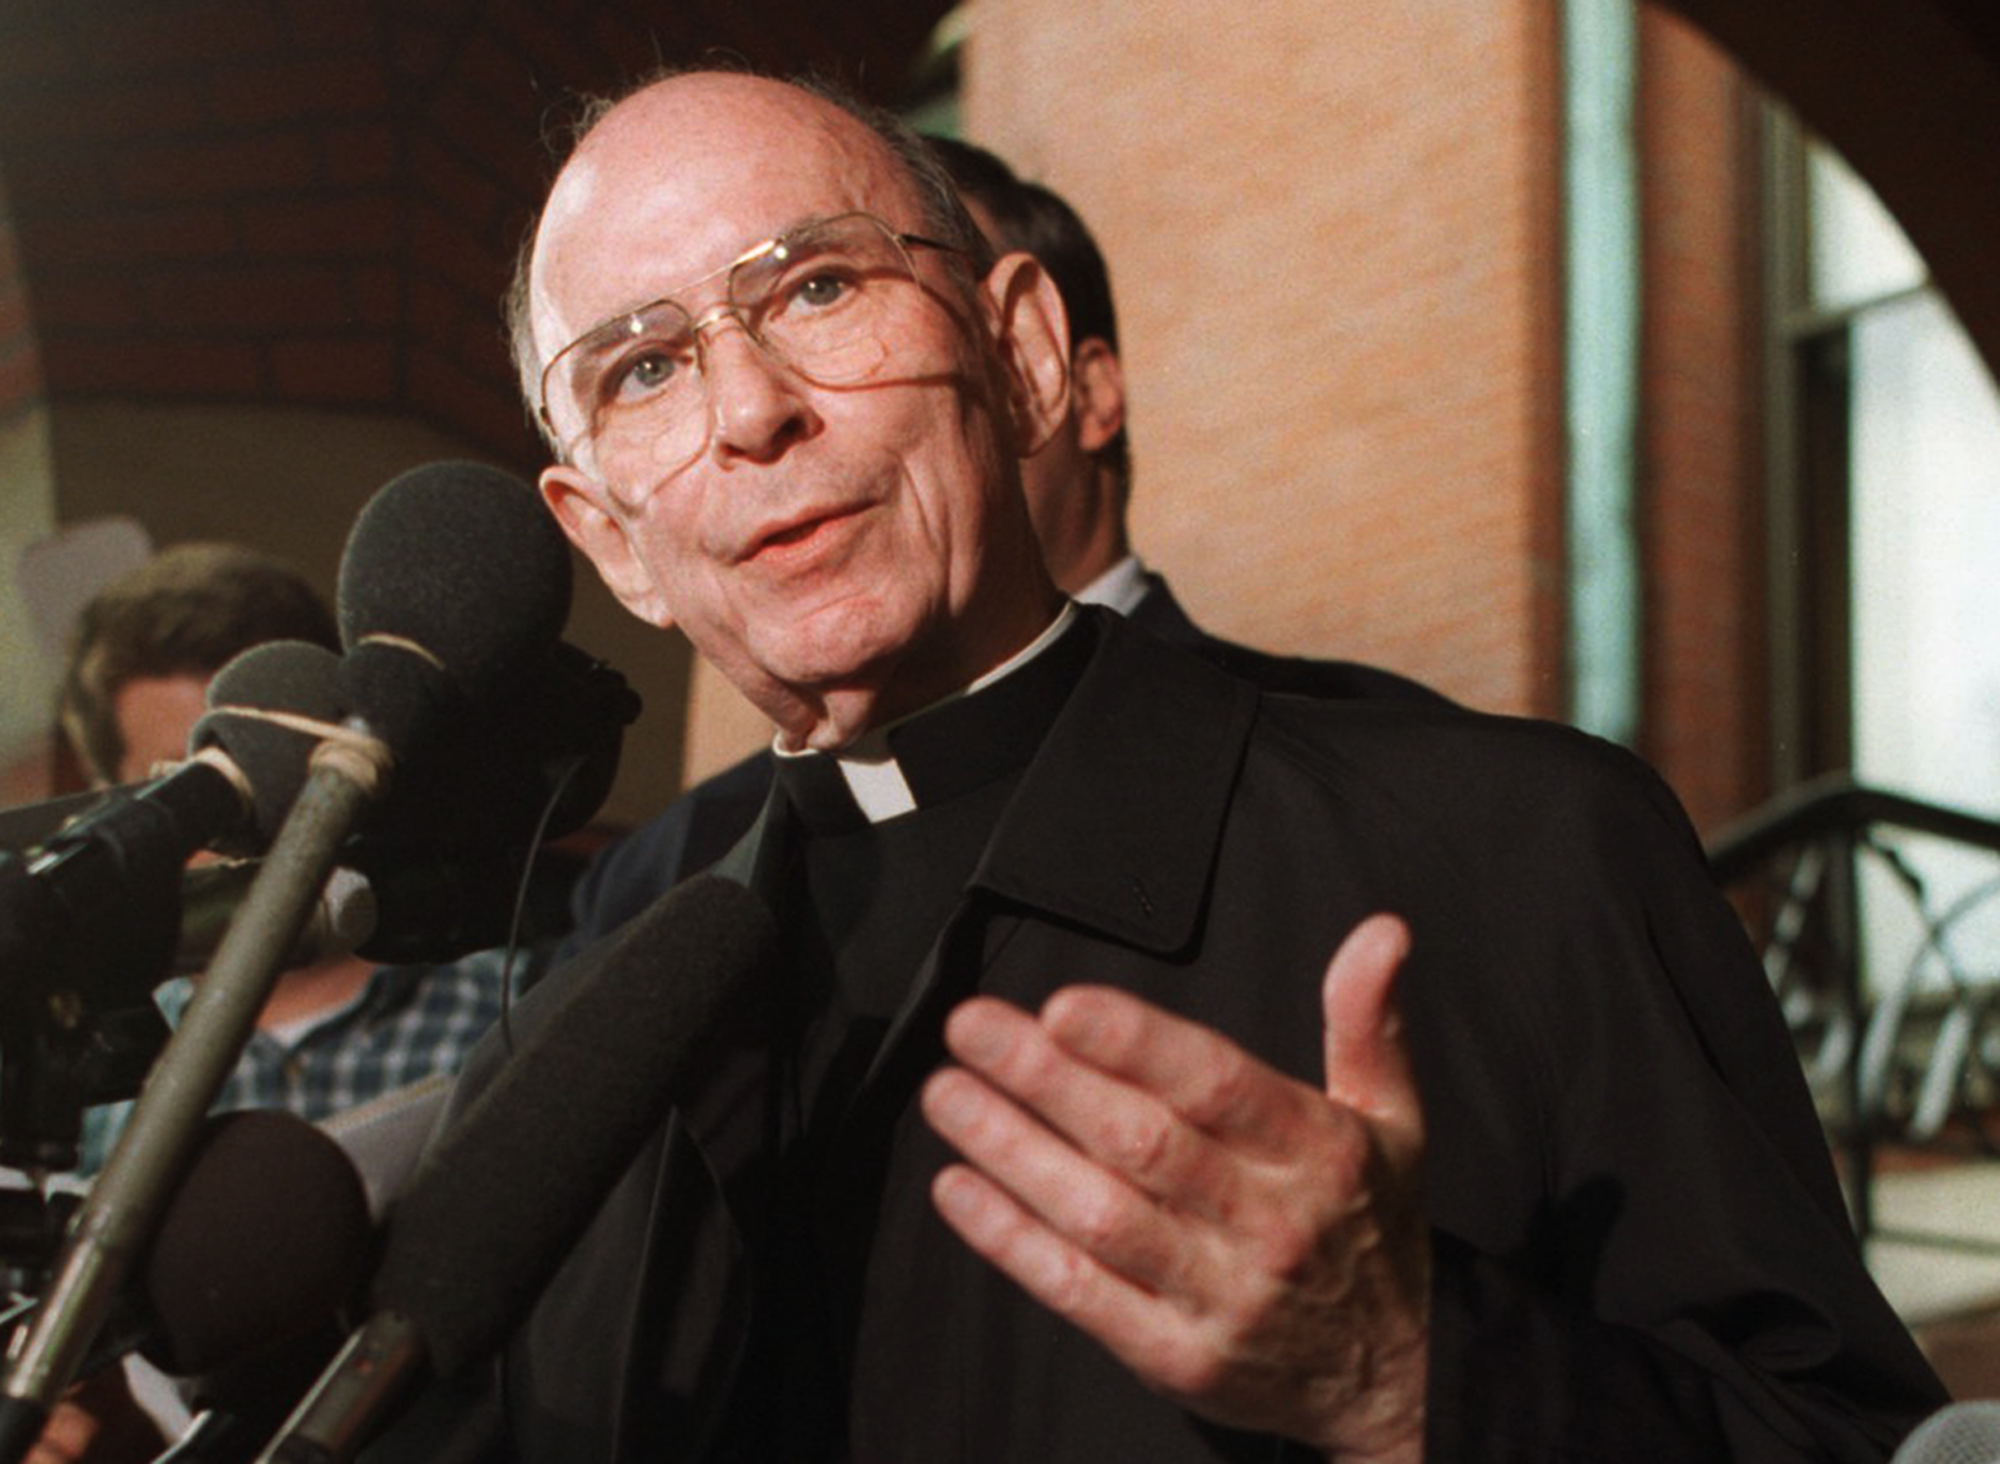 In this Sept. 23, 1996 file photo, Cardinal Joseph Bernardin speaks with reporters on the steps of his Chicago residence just before his departure for Rome to meet with Pope John Paul II. (AP Photo/Peter Barreras, File)